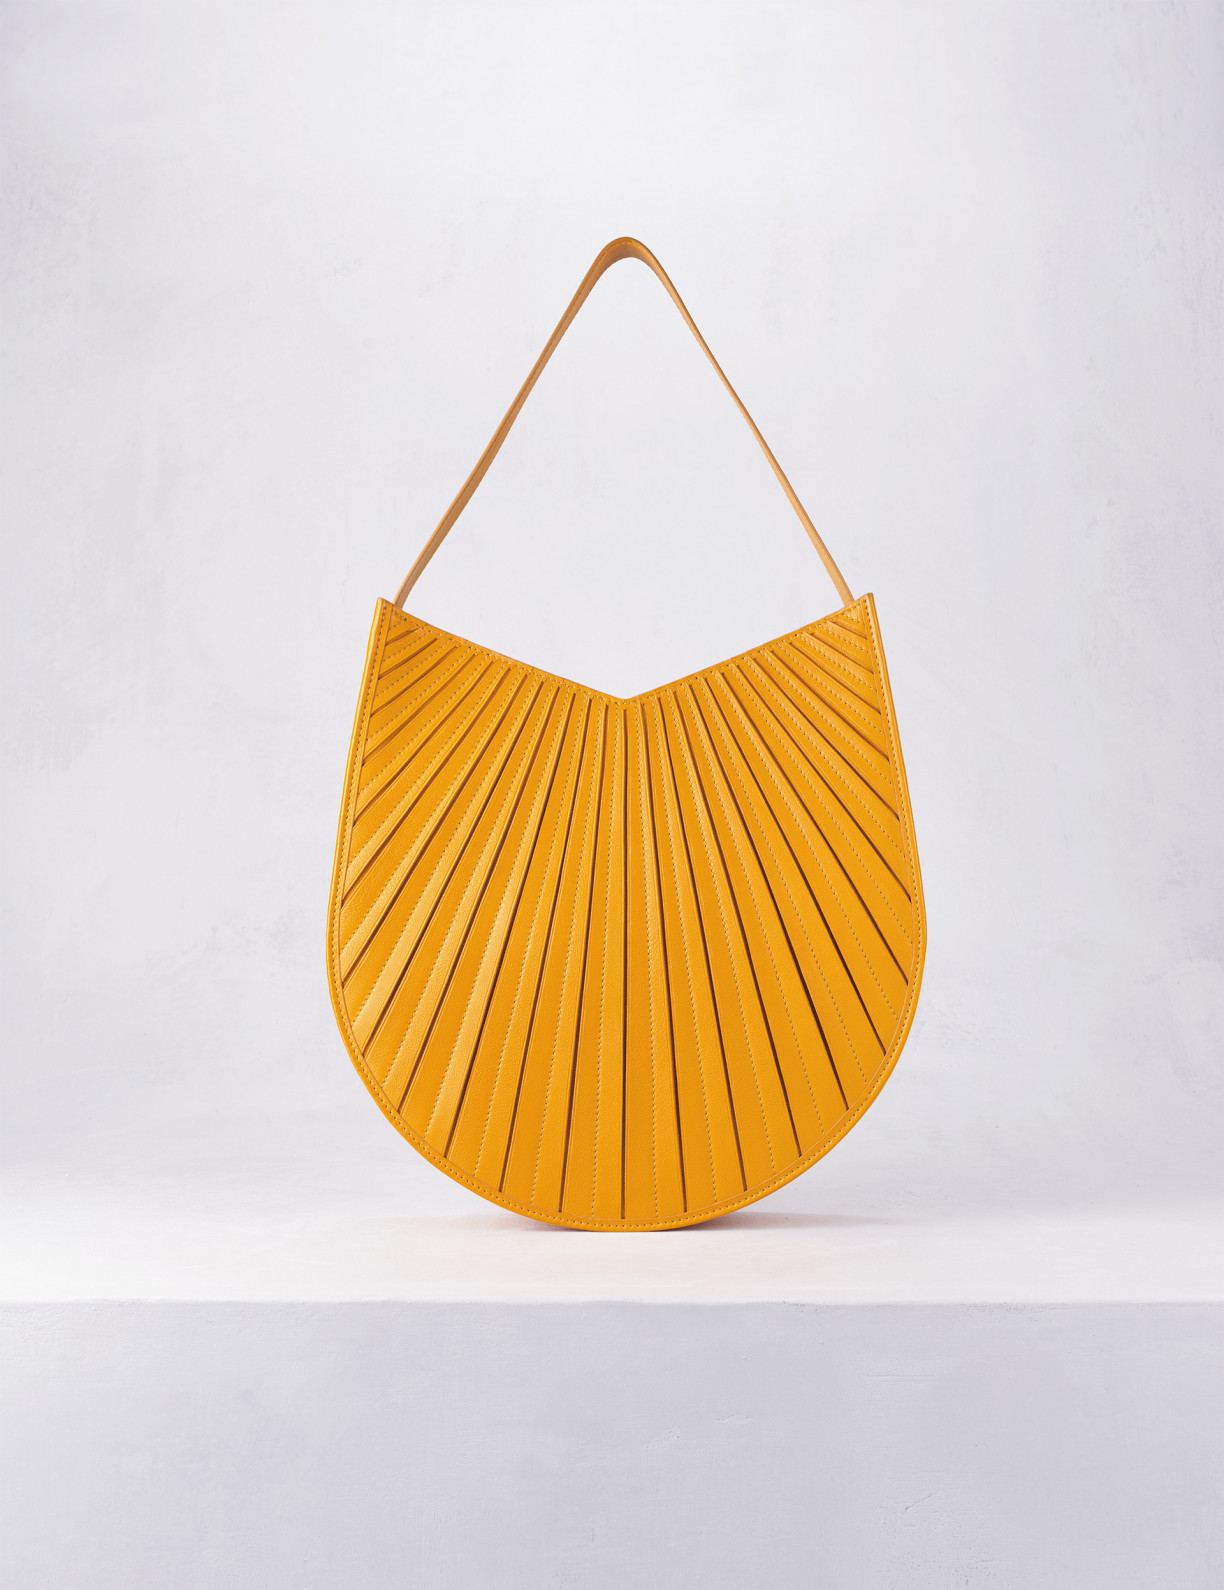 32.06 Hobo bag in pleated leather